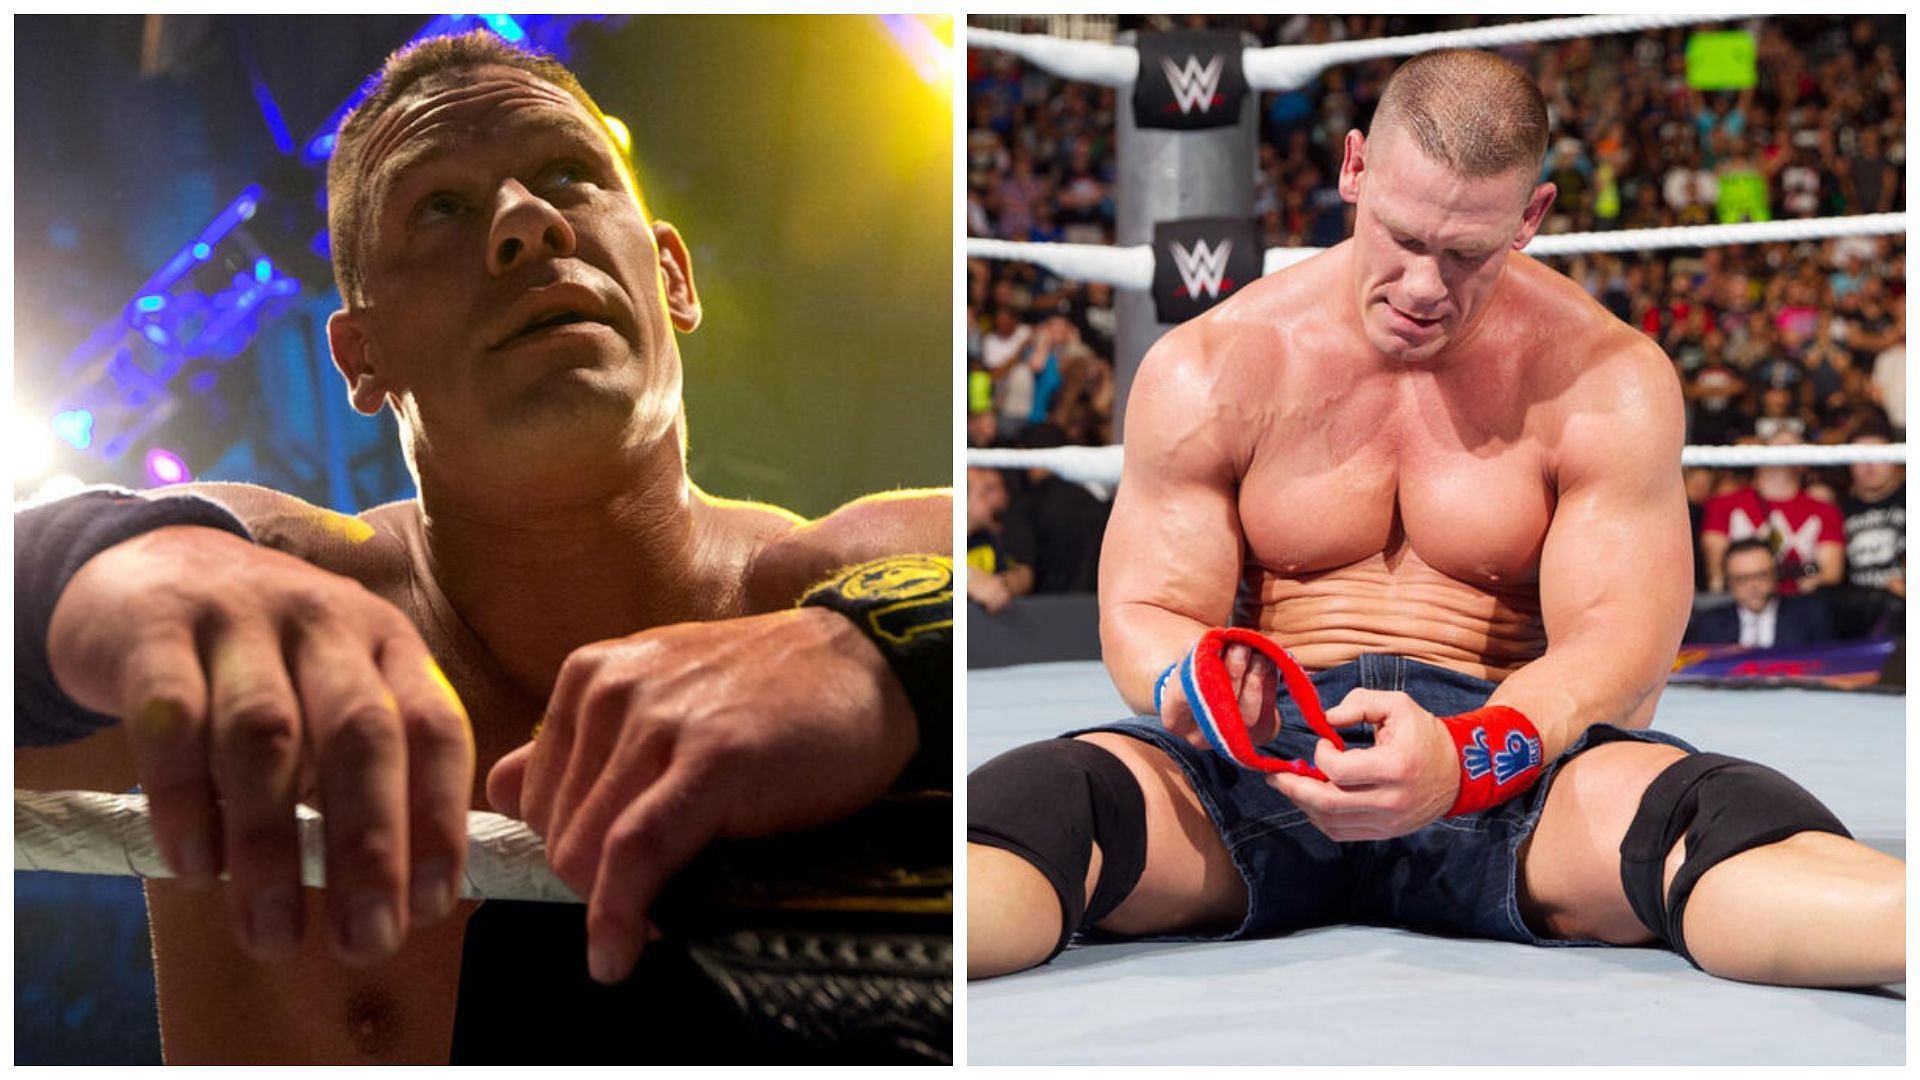 John Cena is a 16-time World Champion in WWE.